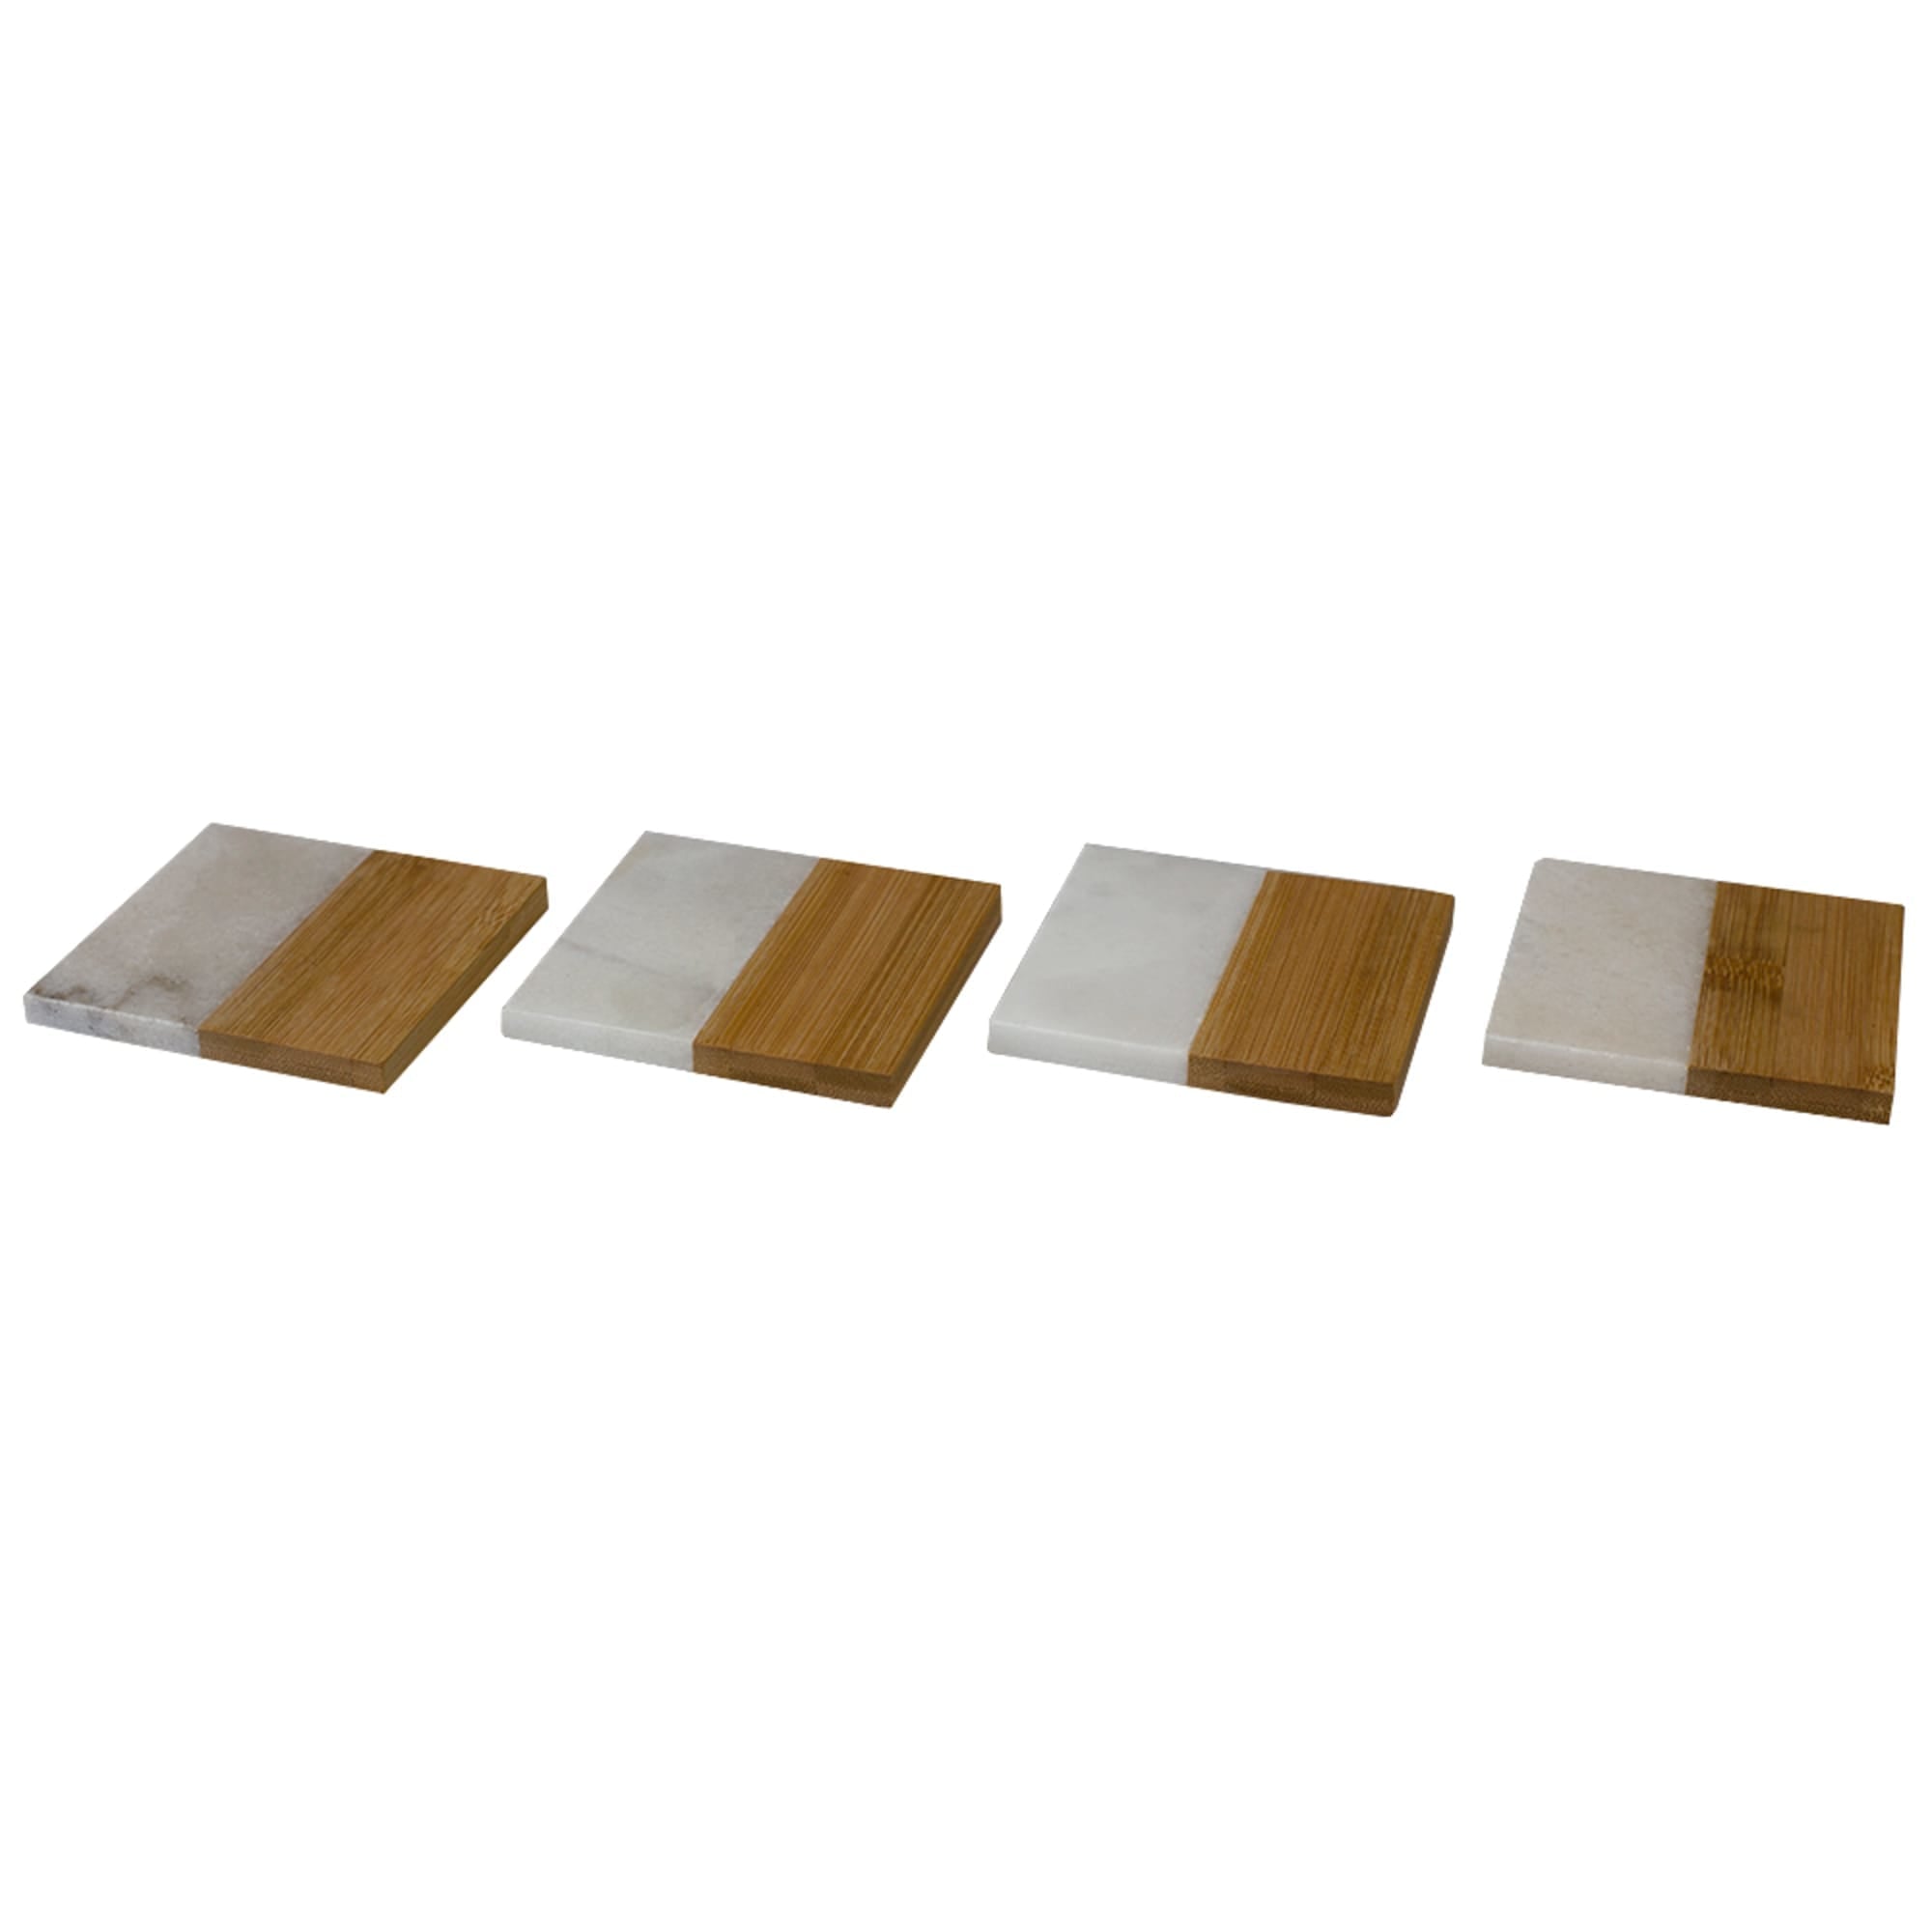 Home Basics Bamboo and Absorbent Decorative Beverage  Square  Marble Coasters, (Set of 4) $5.00 EACH, CASE PACK OF 16